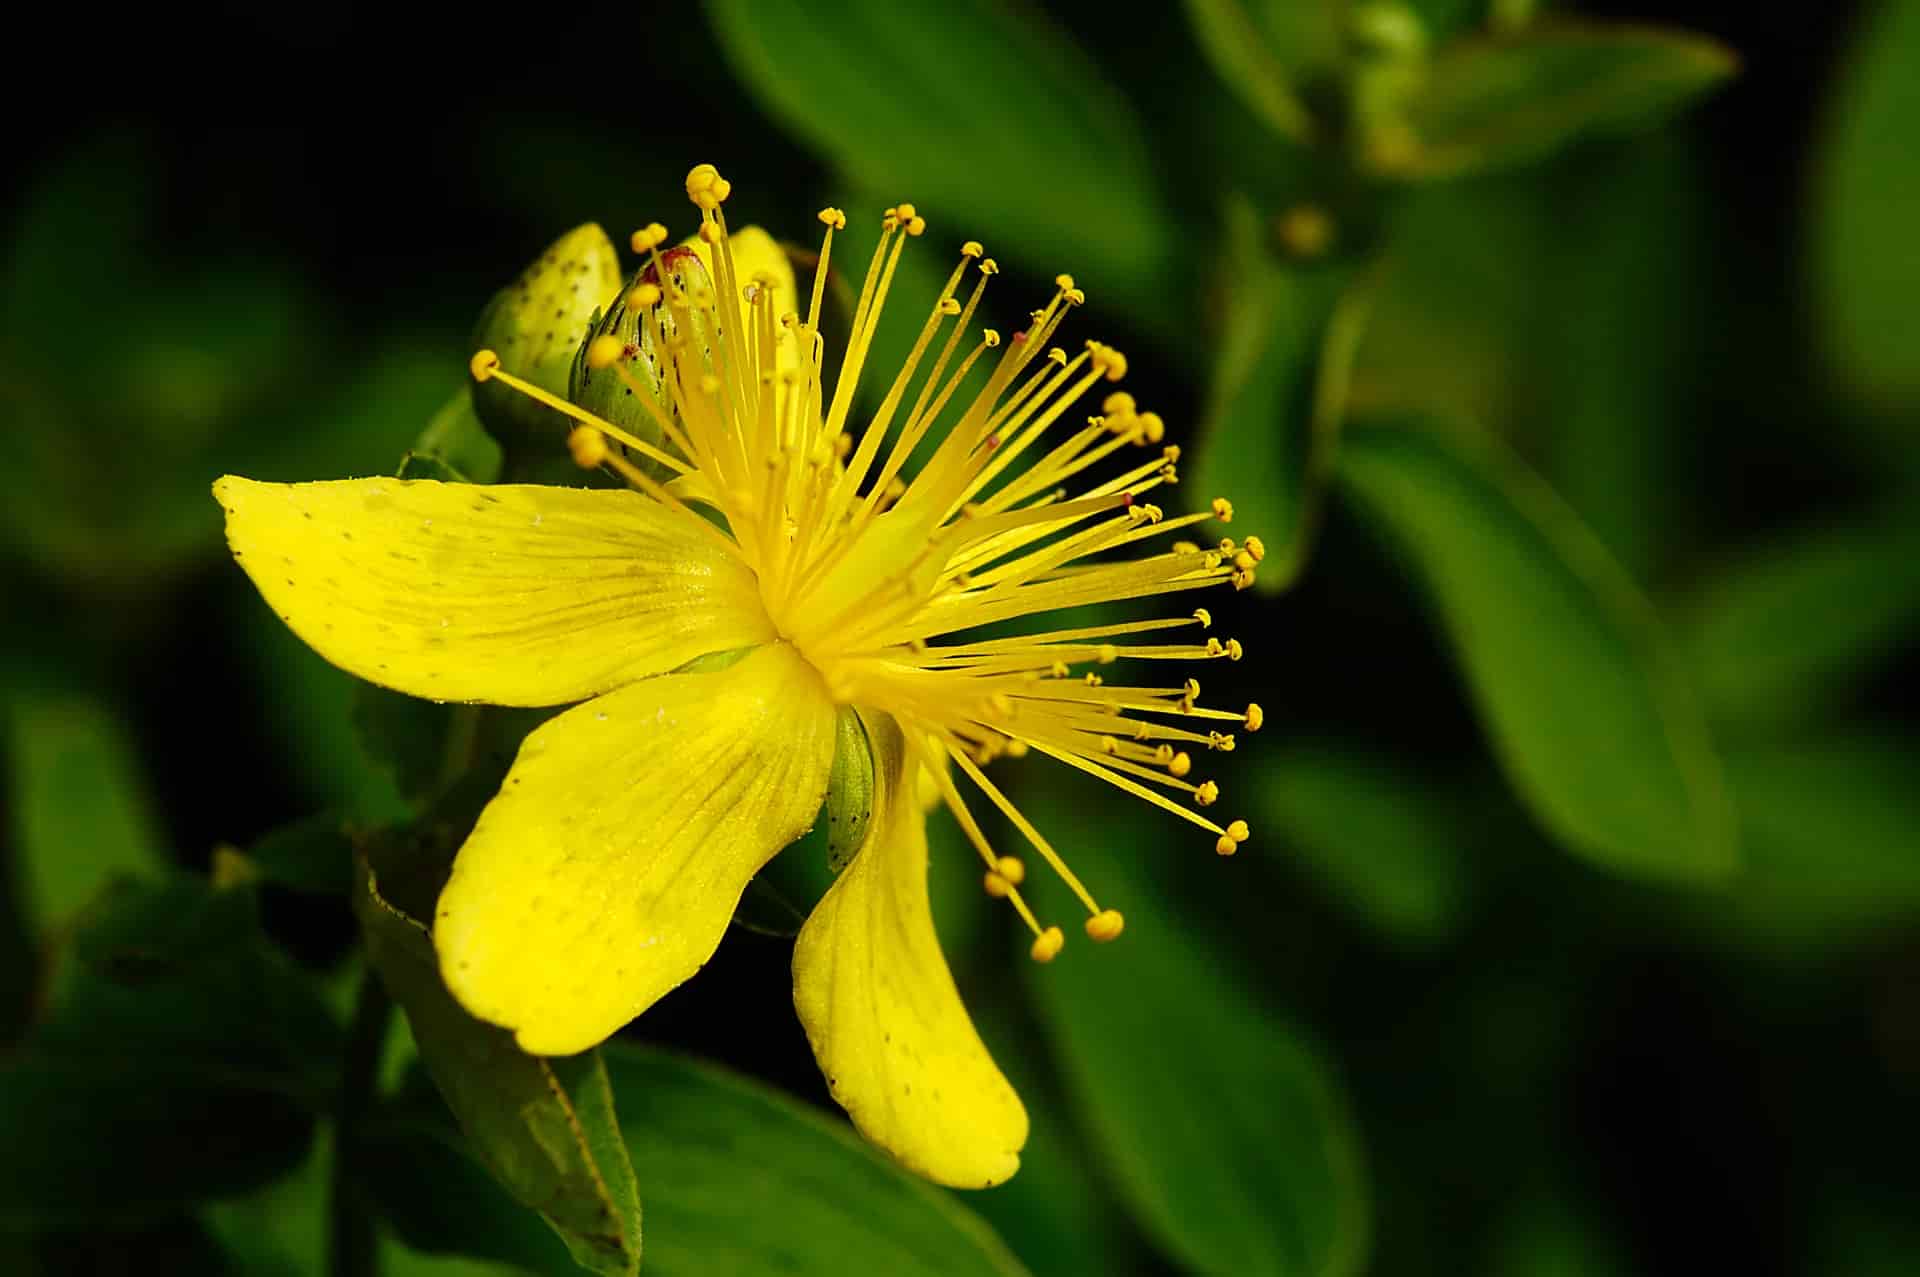 Herb of the Month: St. John's Wort